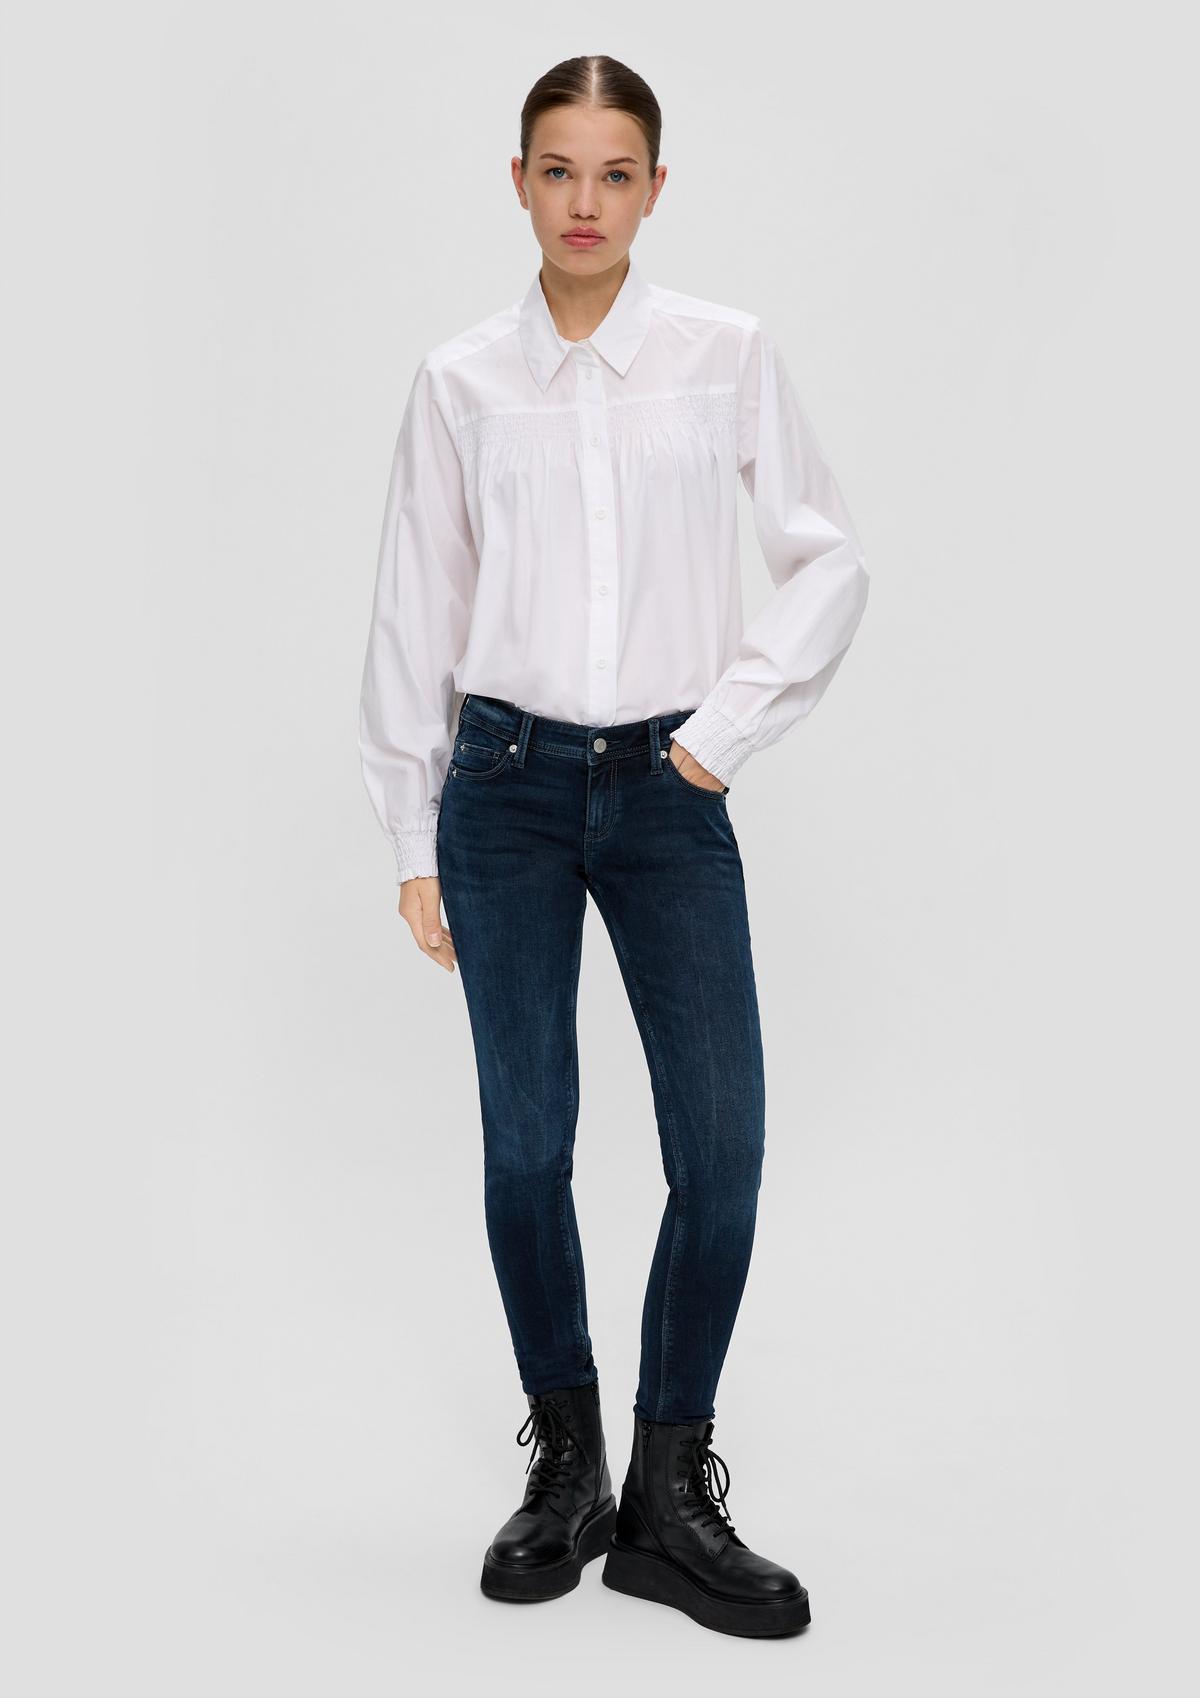 s.Oliver Jean / coupe Skinny Fit / taille basse / Skinny Leg